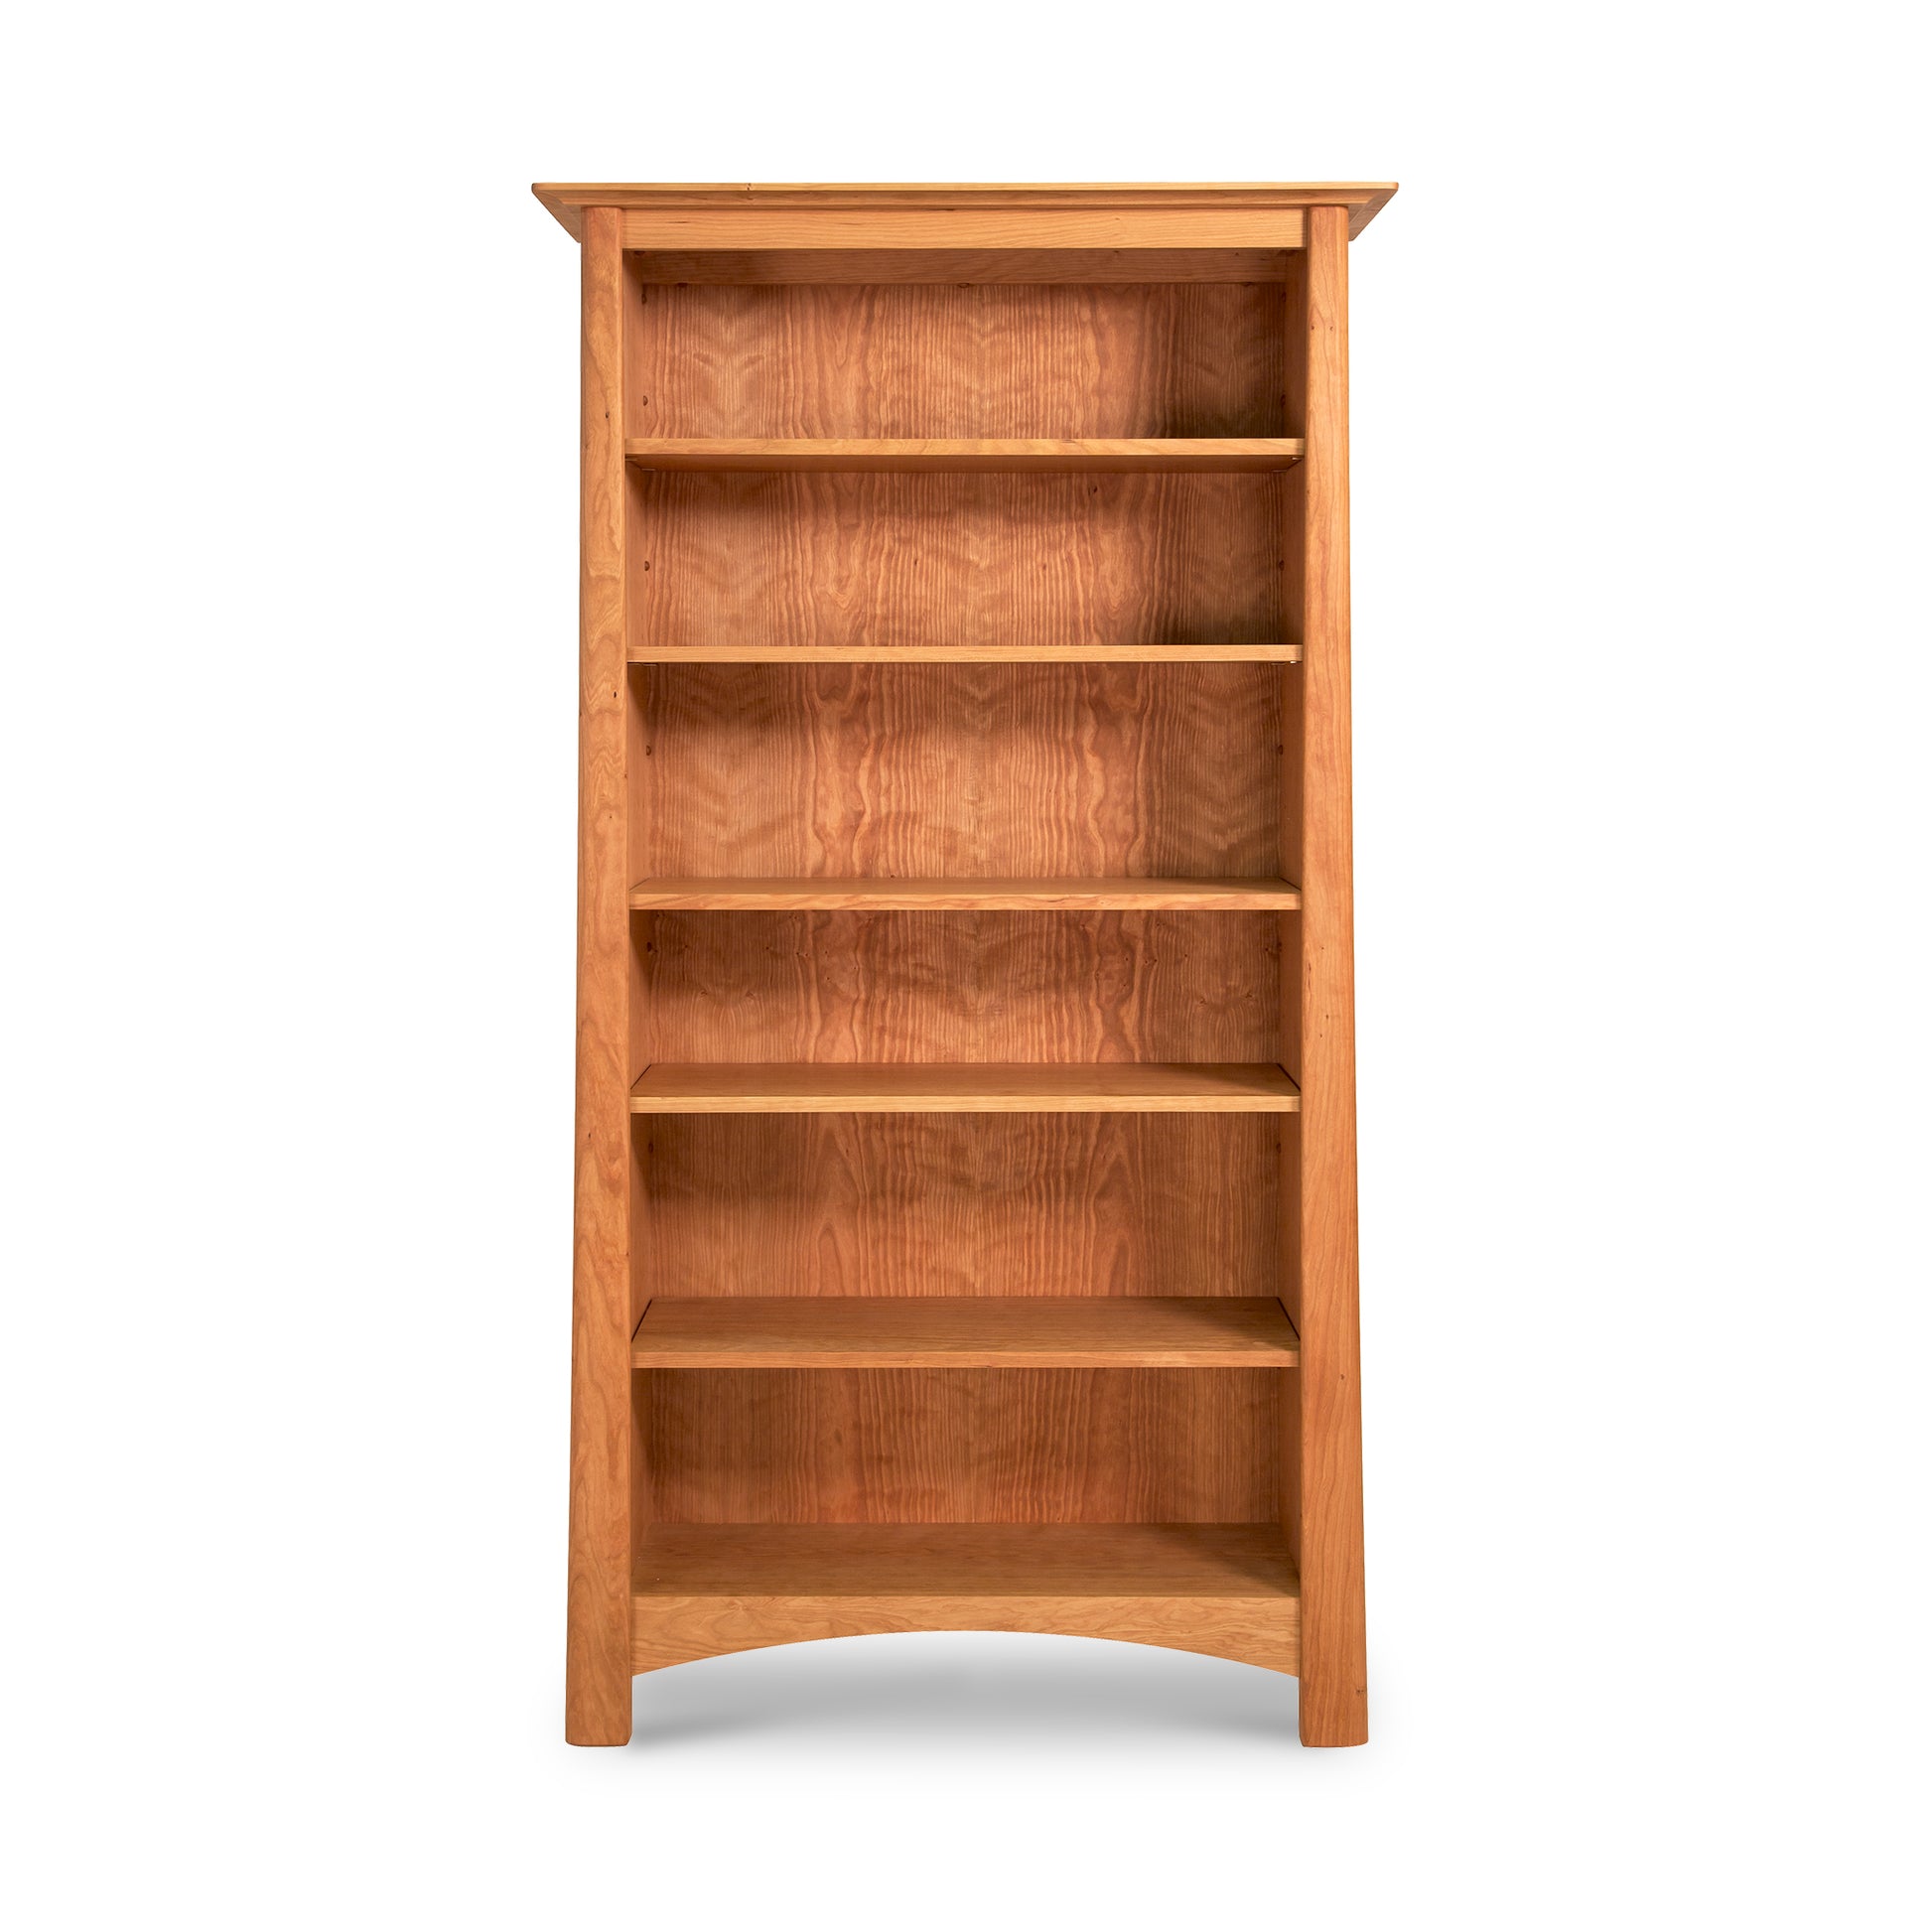 Cherry Moon Bookcase bookshelf by Maple Corner Woodworks, with five shelves, isolated on a white background.